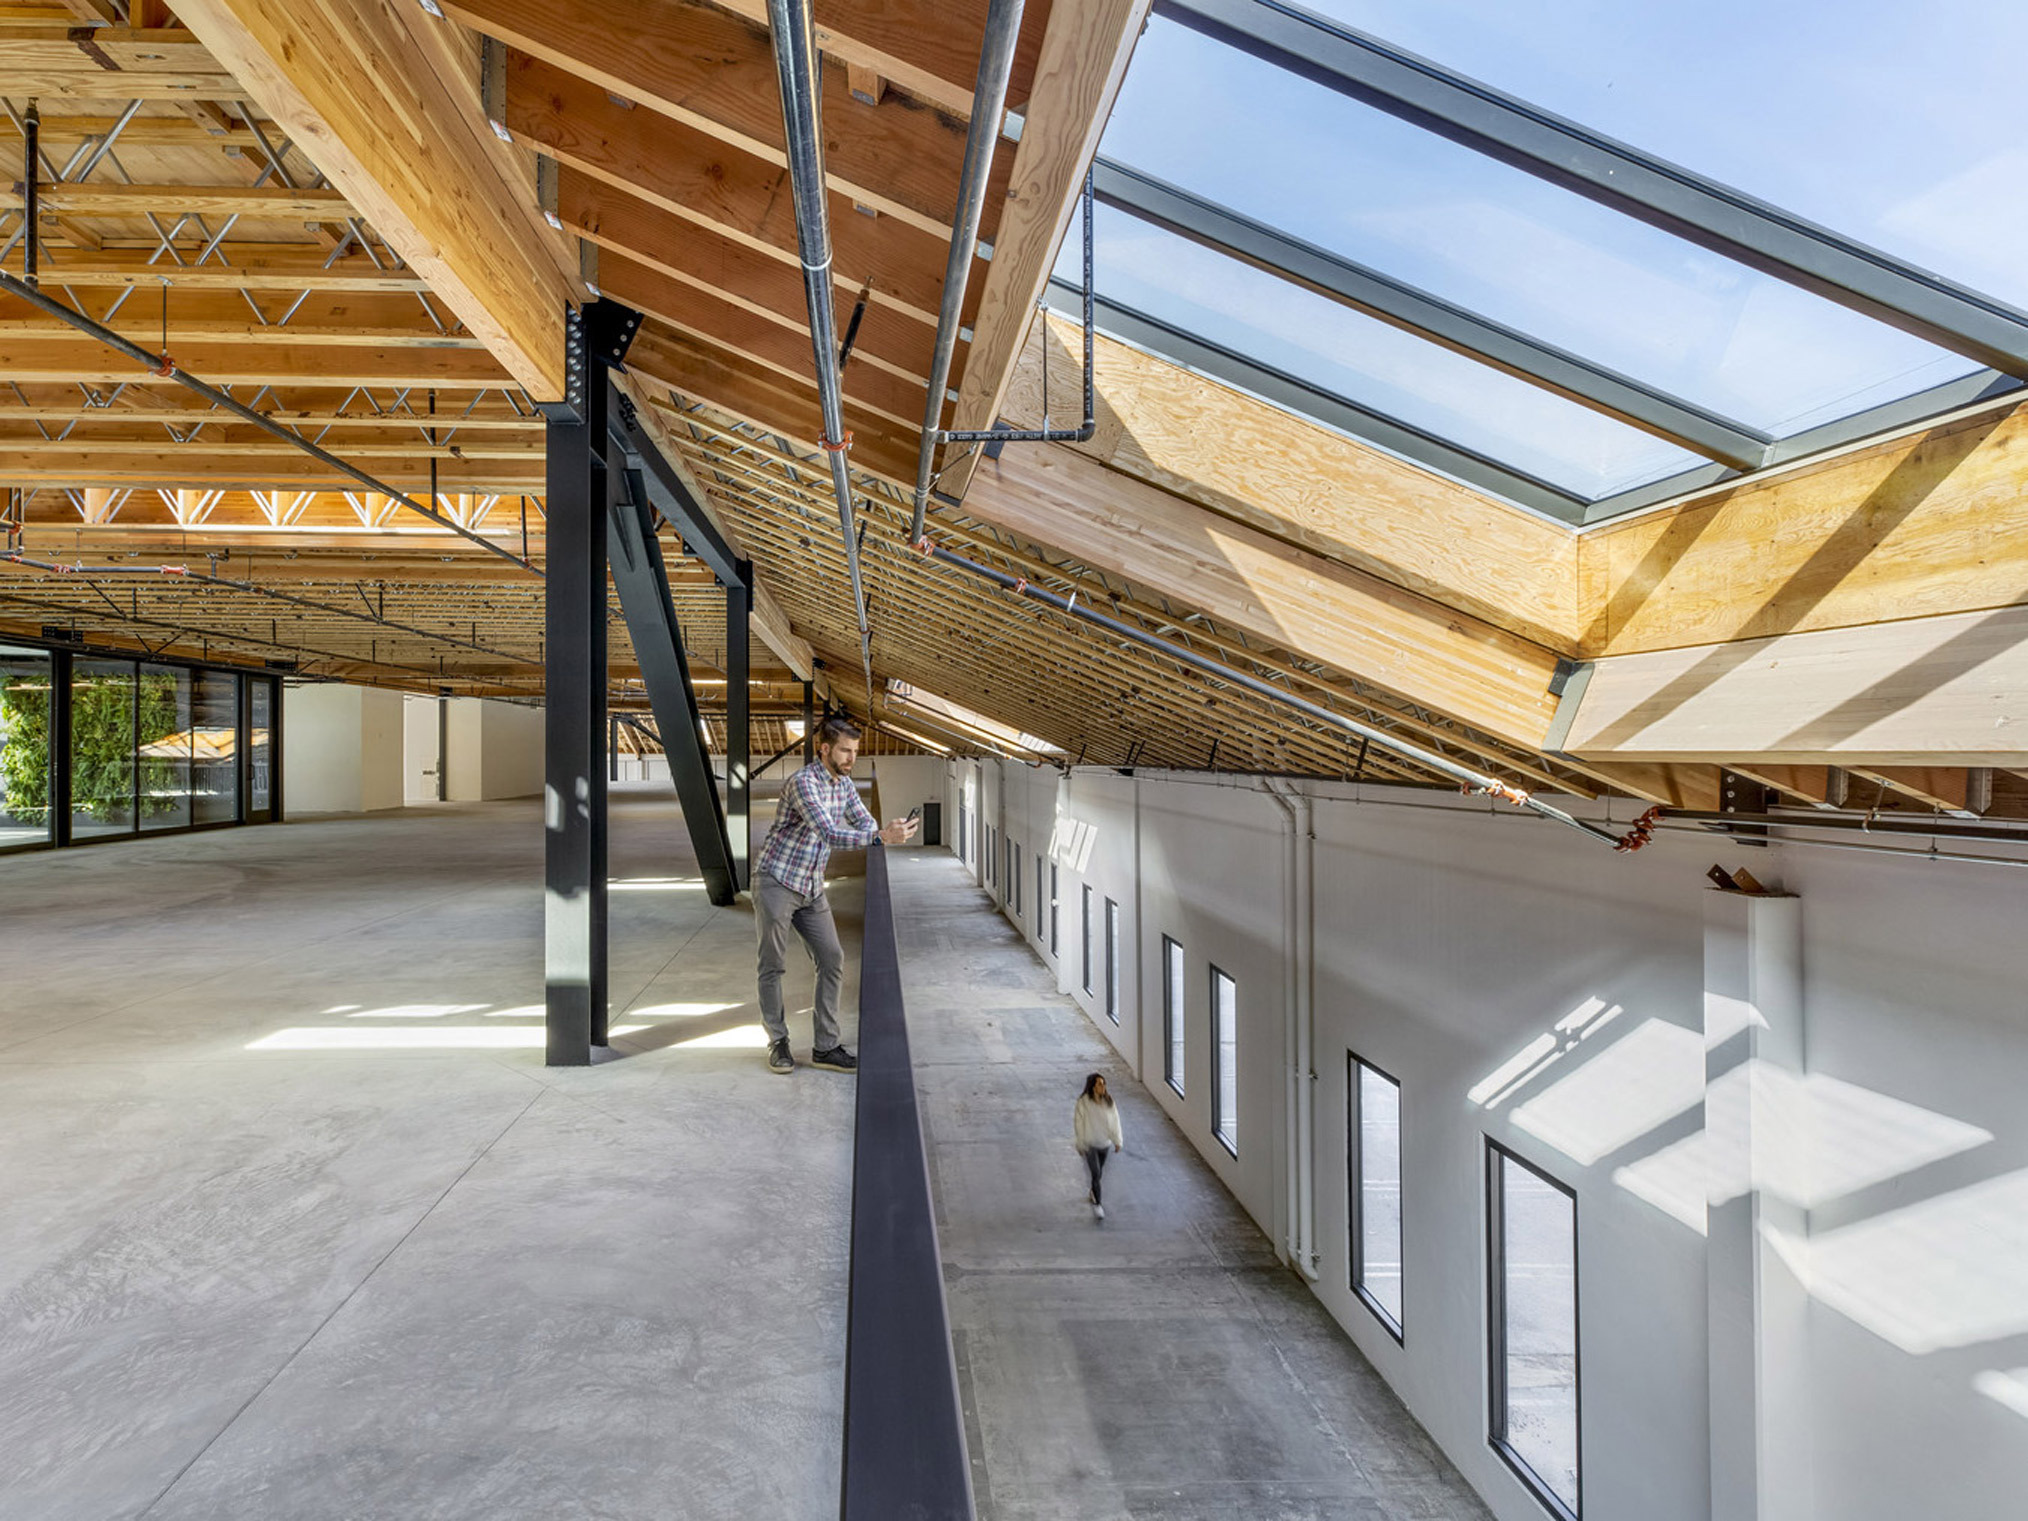 Open-plan office space with exposed wooden beams and diagonal steel braces. Natural light floods in through clerestory windows, highlighting polished concrete floors where a person strolls with a small dog.